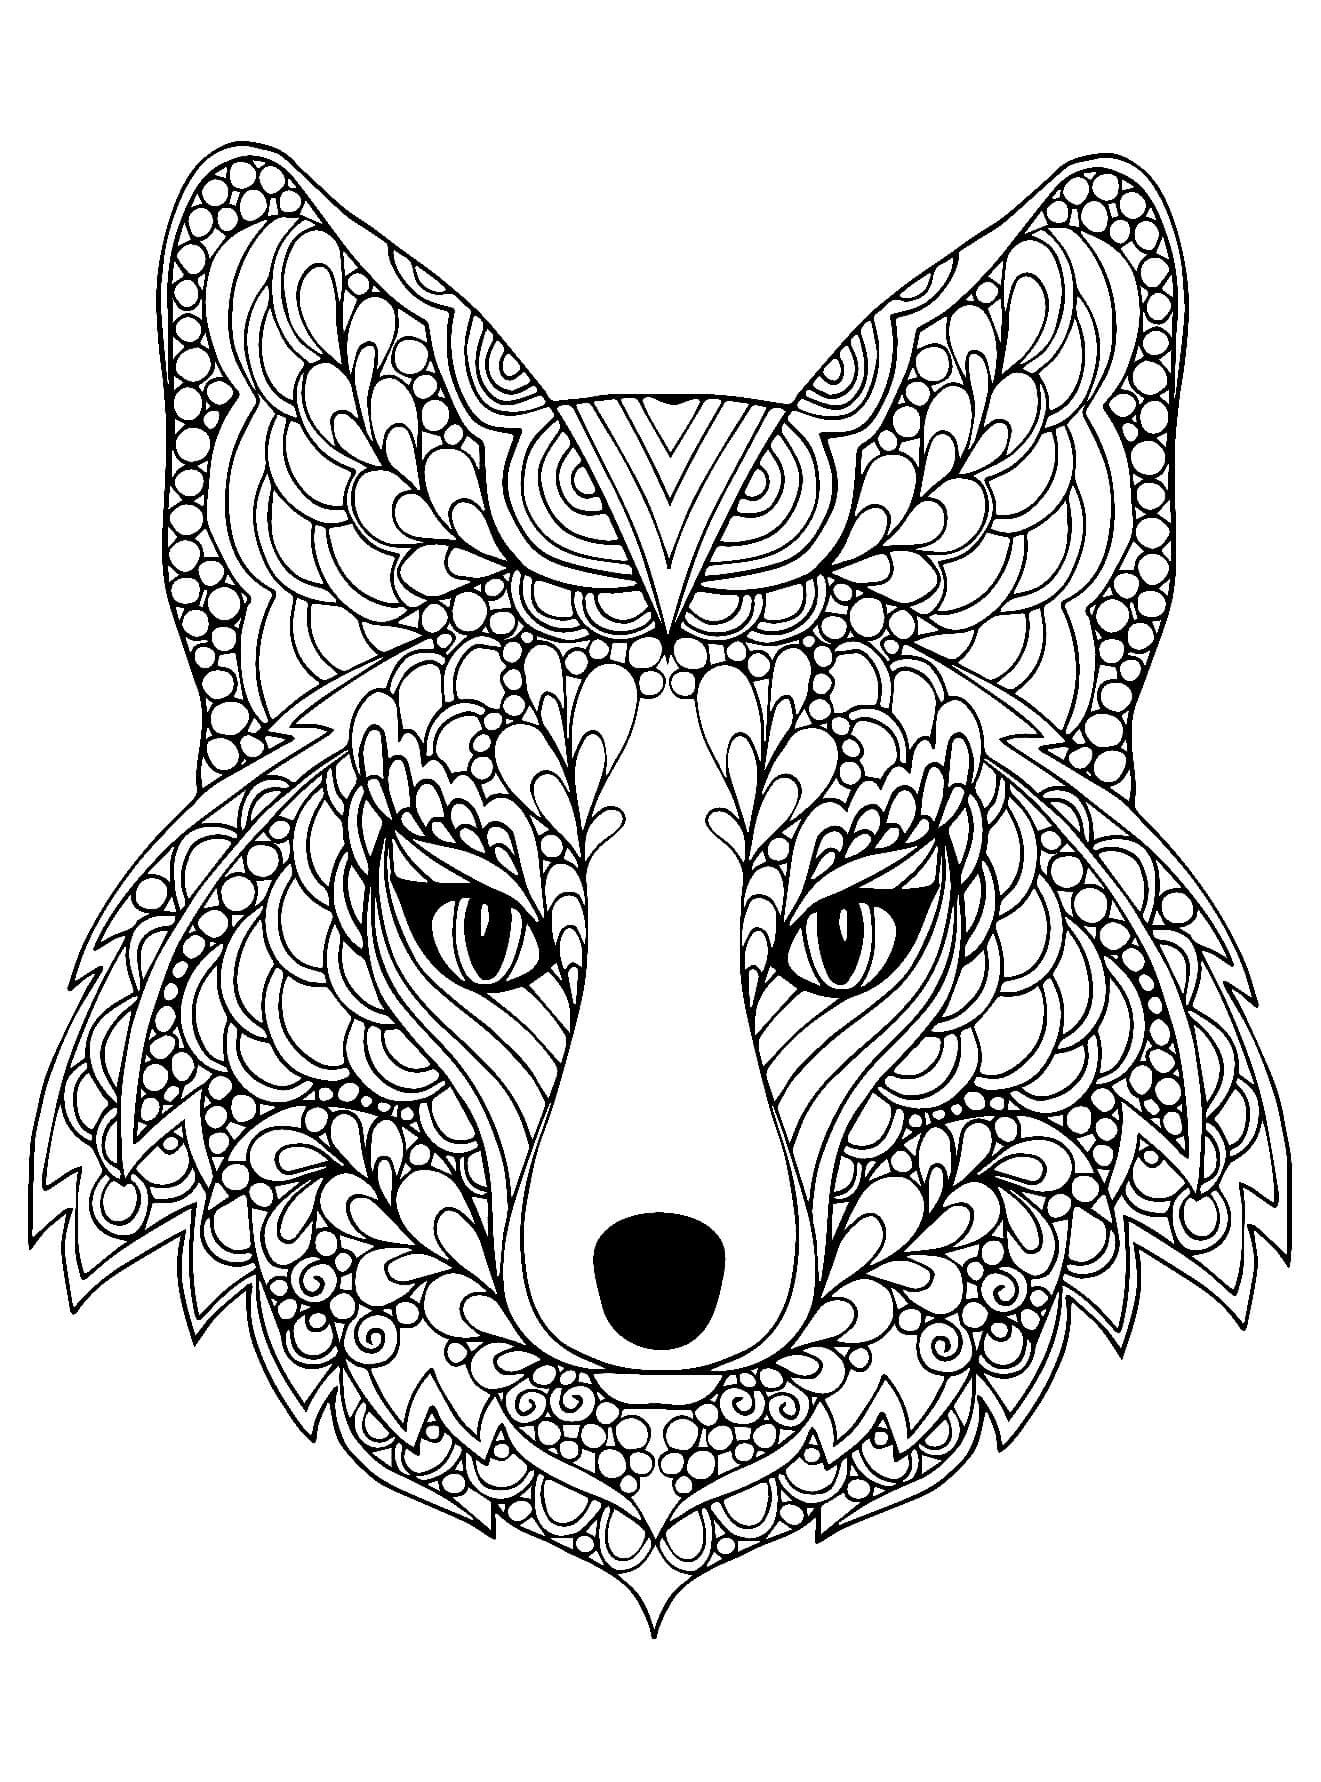 Coloring Pages For Adults Difficult Animals
 Coloring Pages For Adults Difficult Animals 36